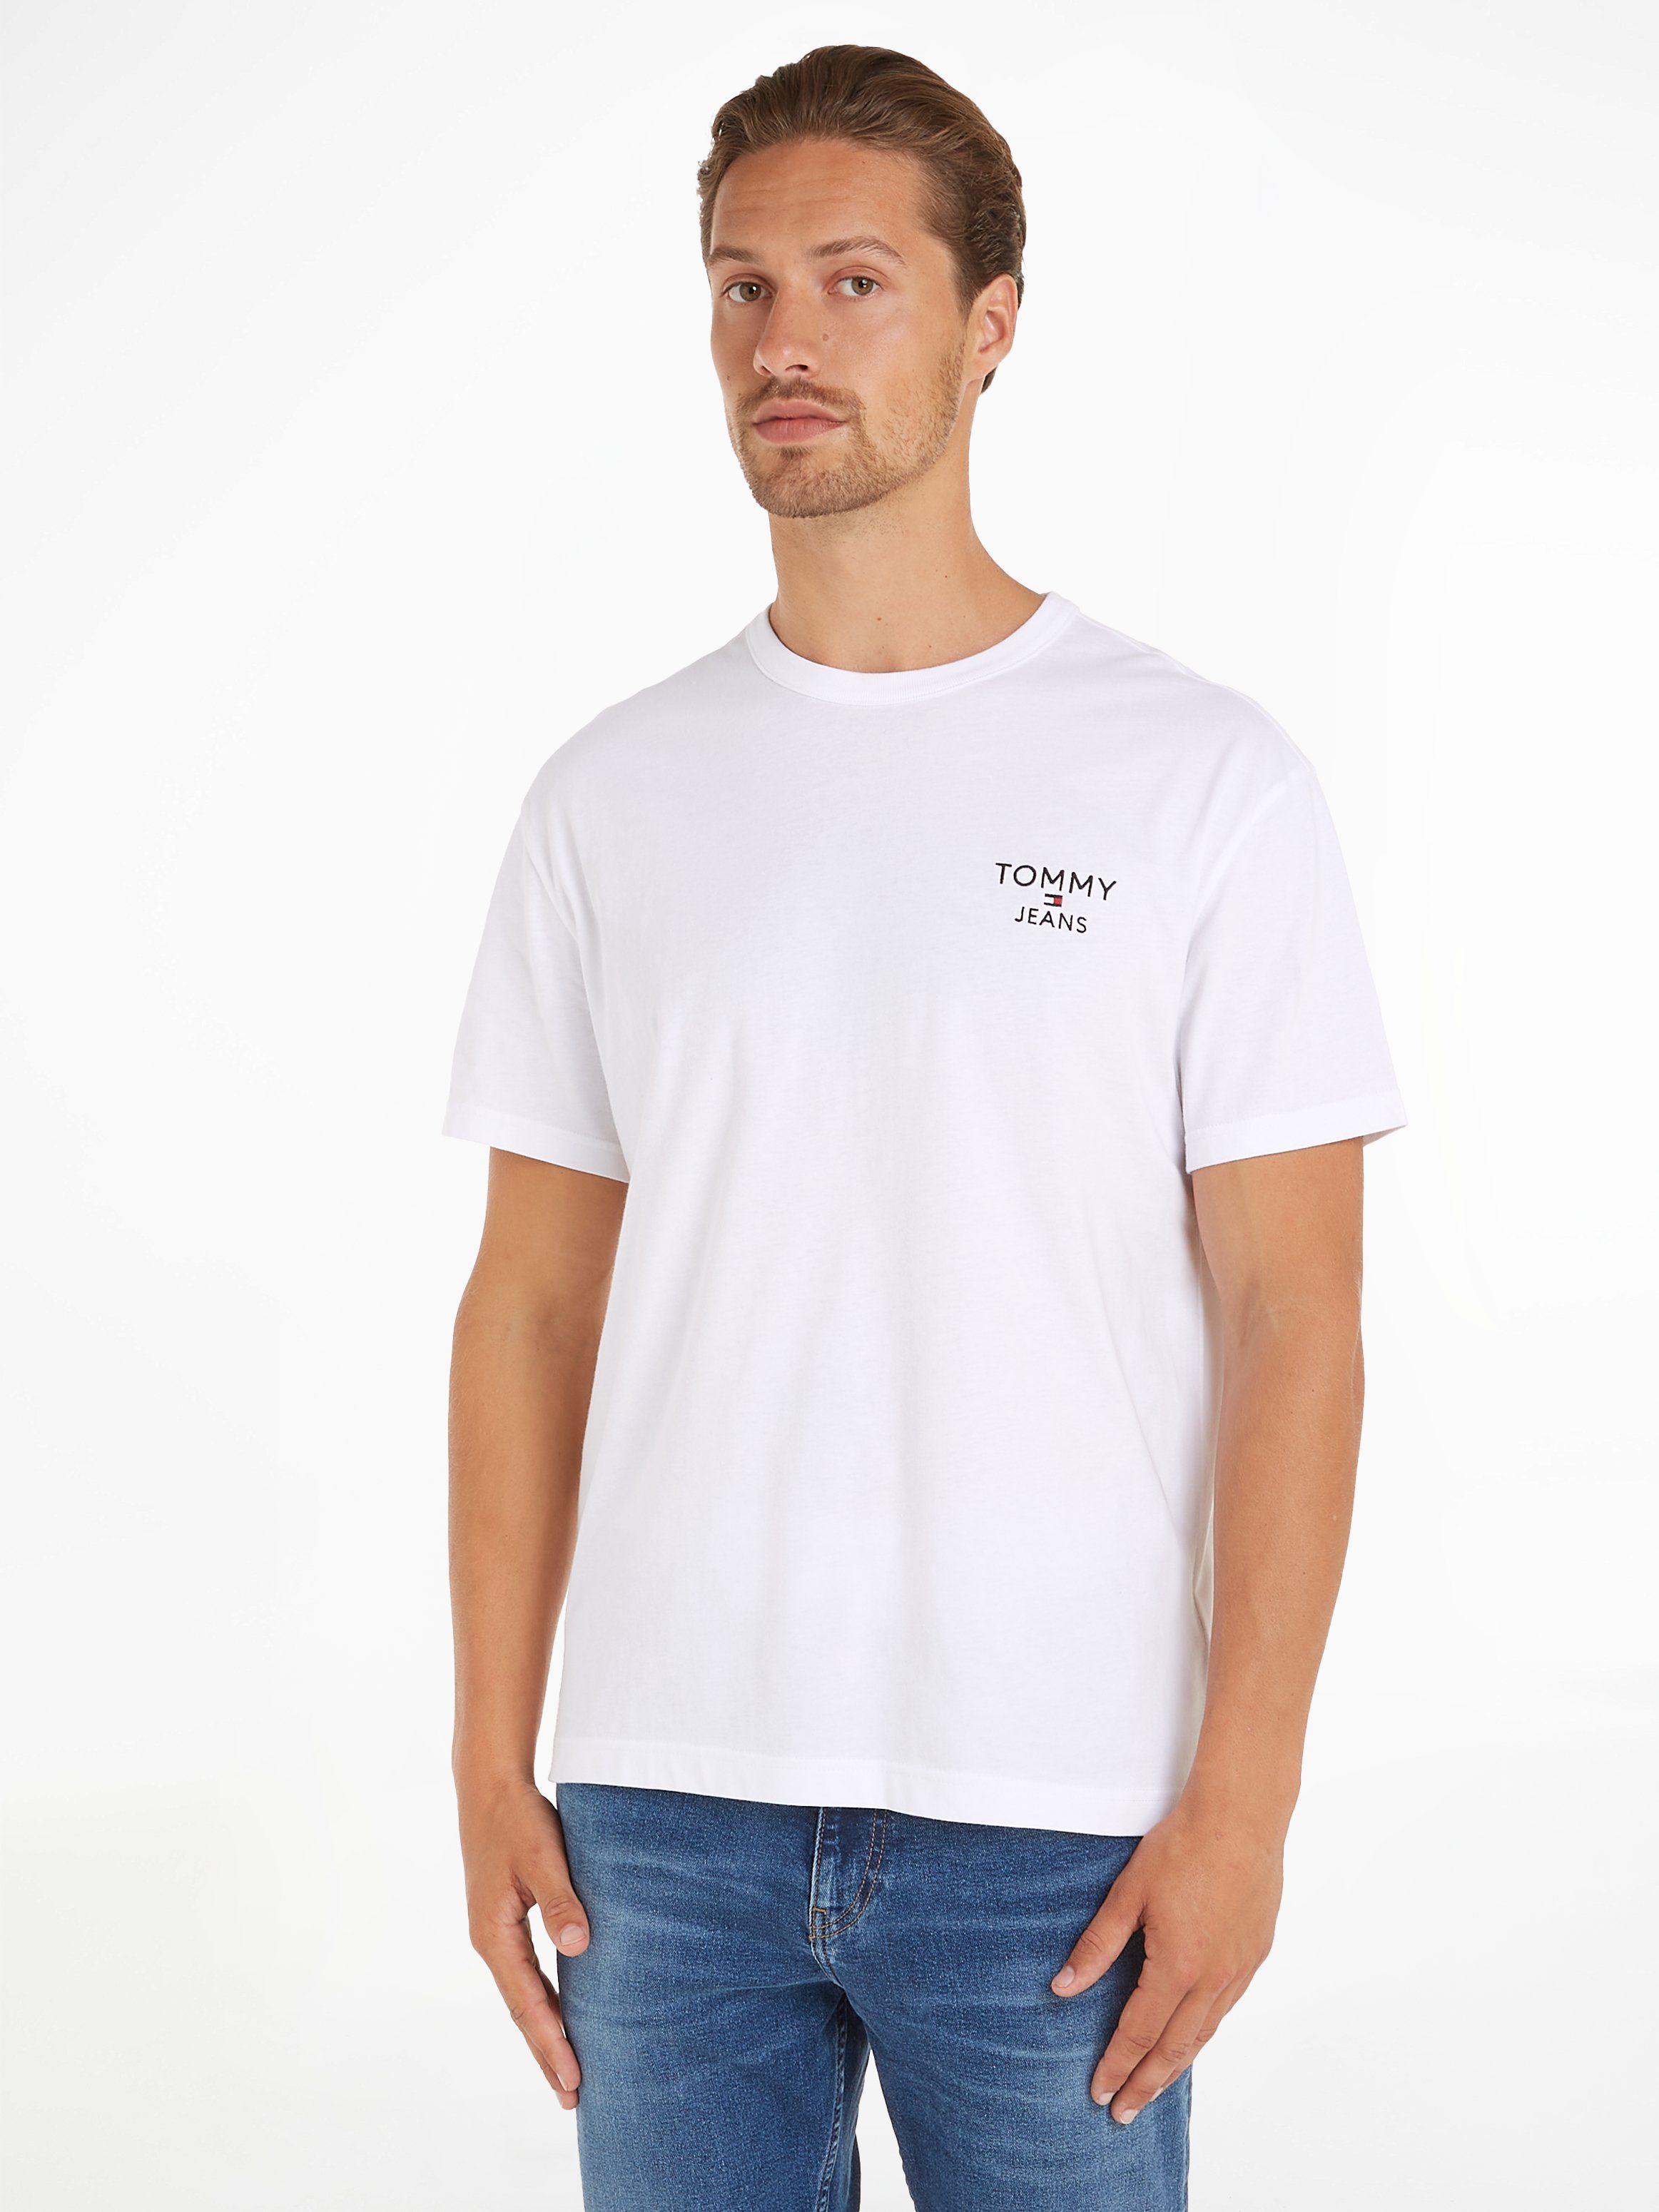 mit Jeans TJM REG Tommy Stickerei CORP EXT Tommy Jeans TEE T-Shirt